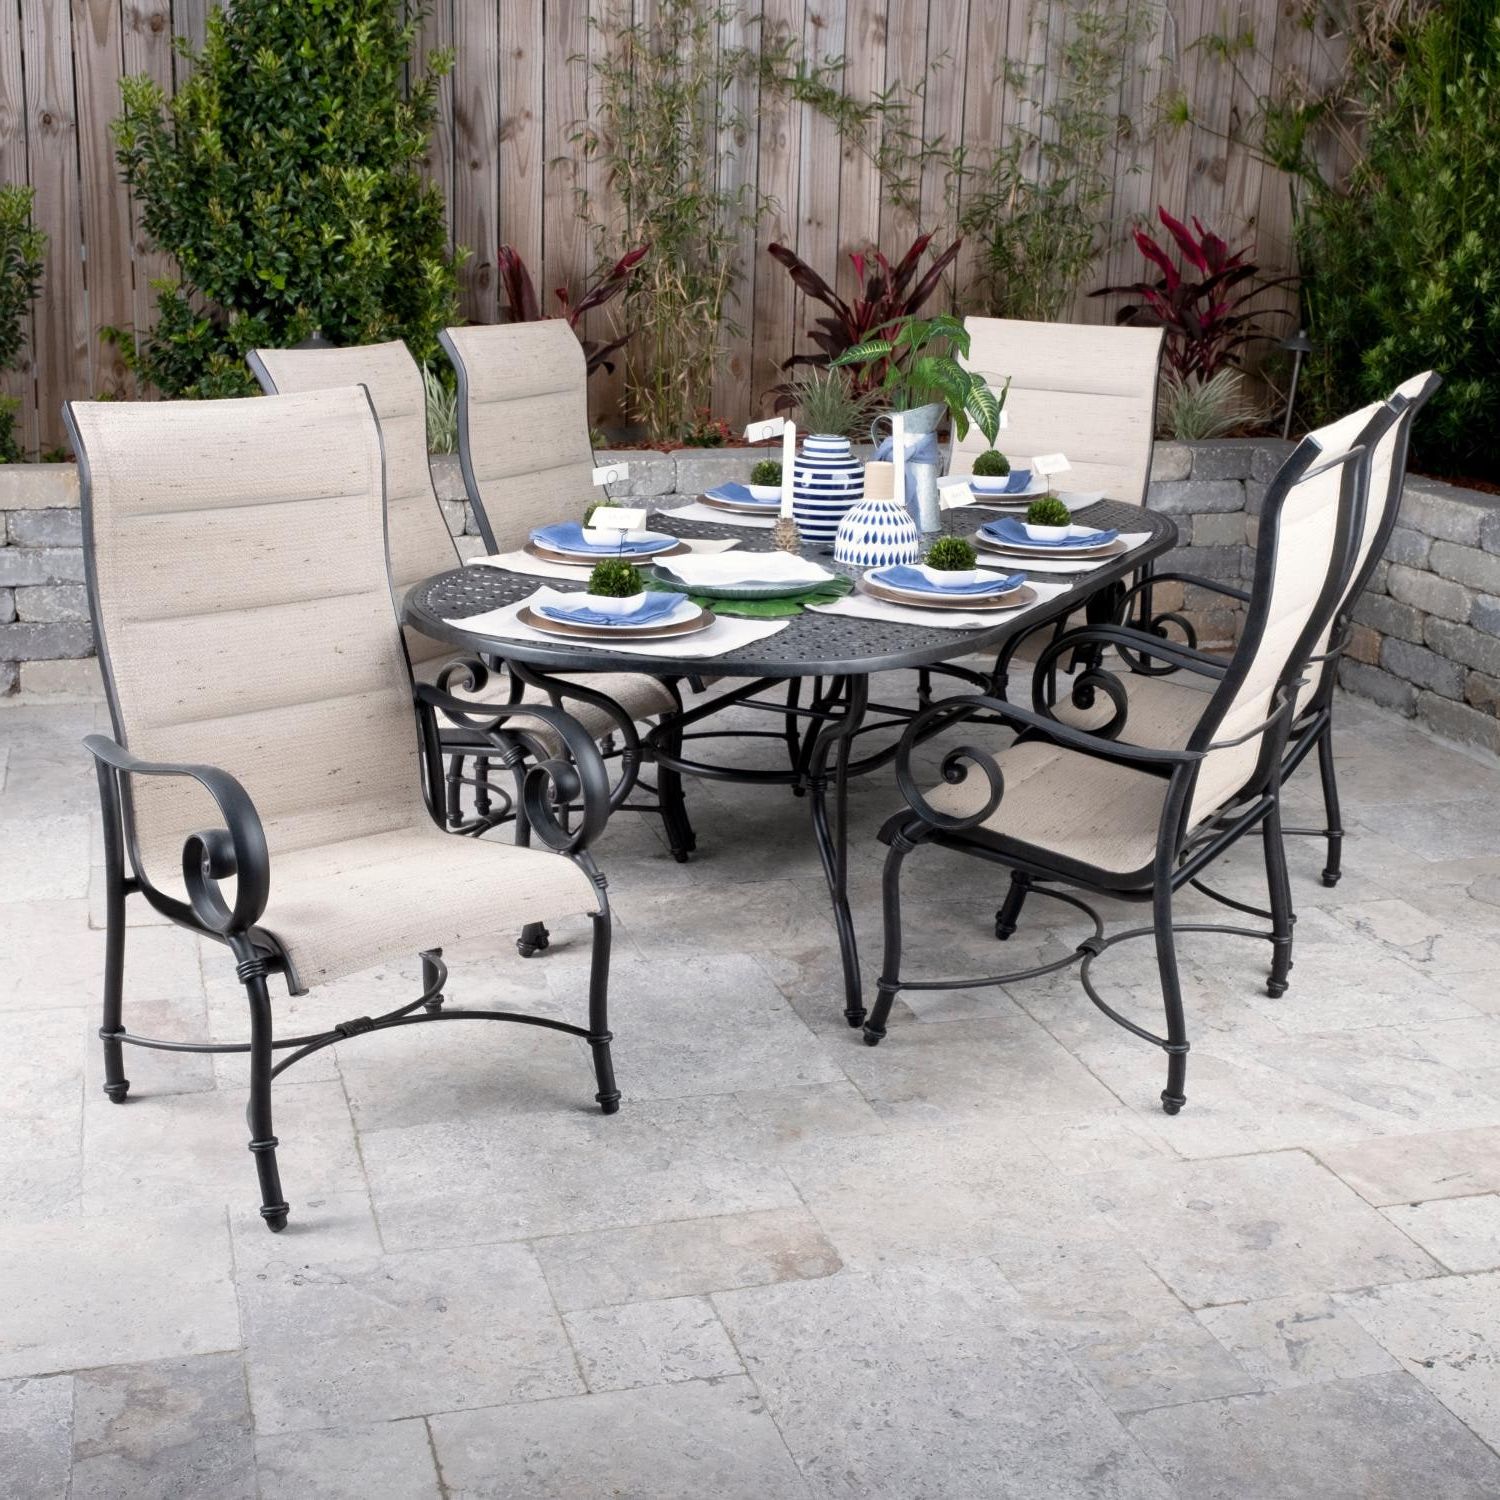 Extendable Oval Patio Dining Sets Throughout Most Recently Released Dining Sling Back Patio Chairs / Berkley Jensen Rowley 9 Pc Sling (View 15 of 15)